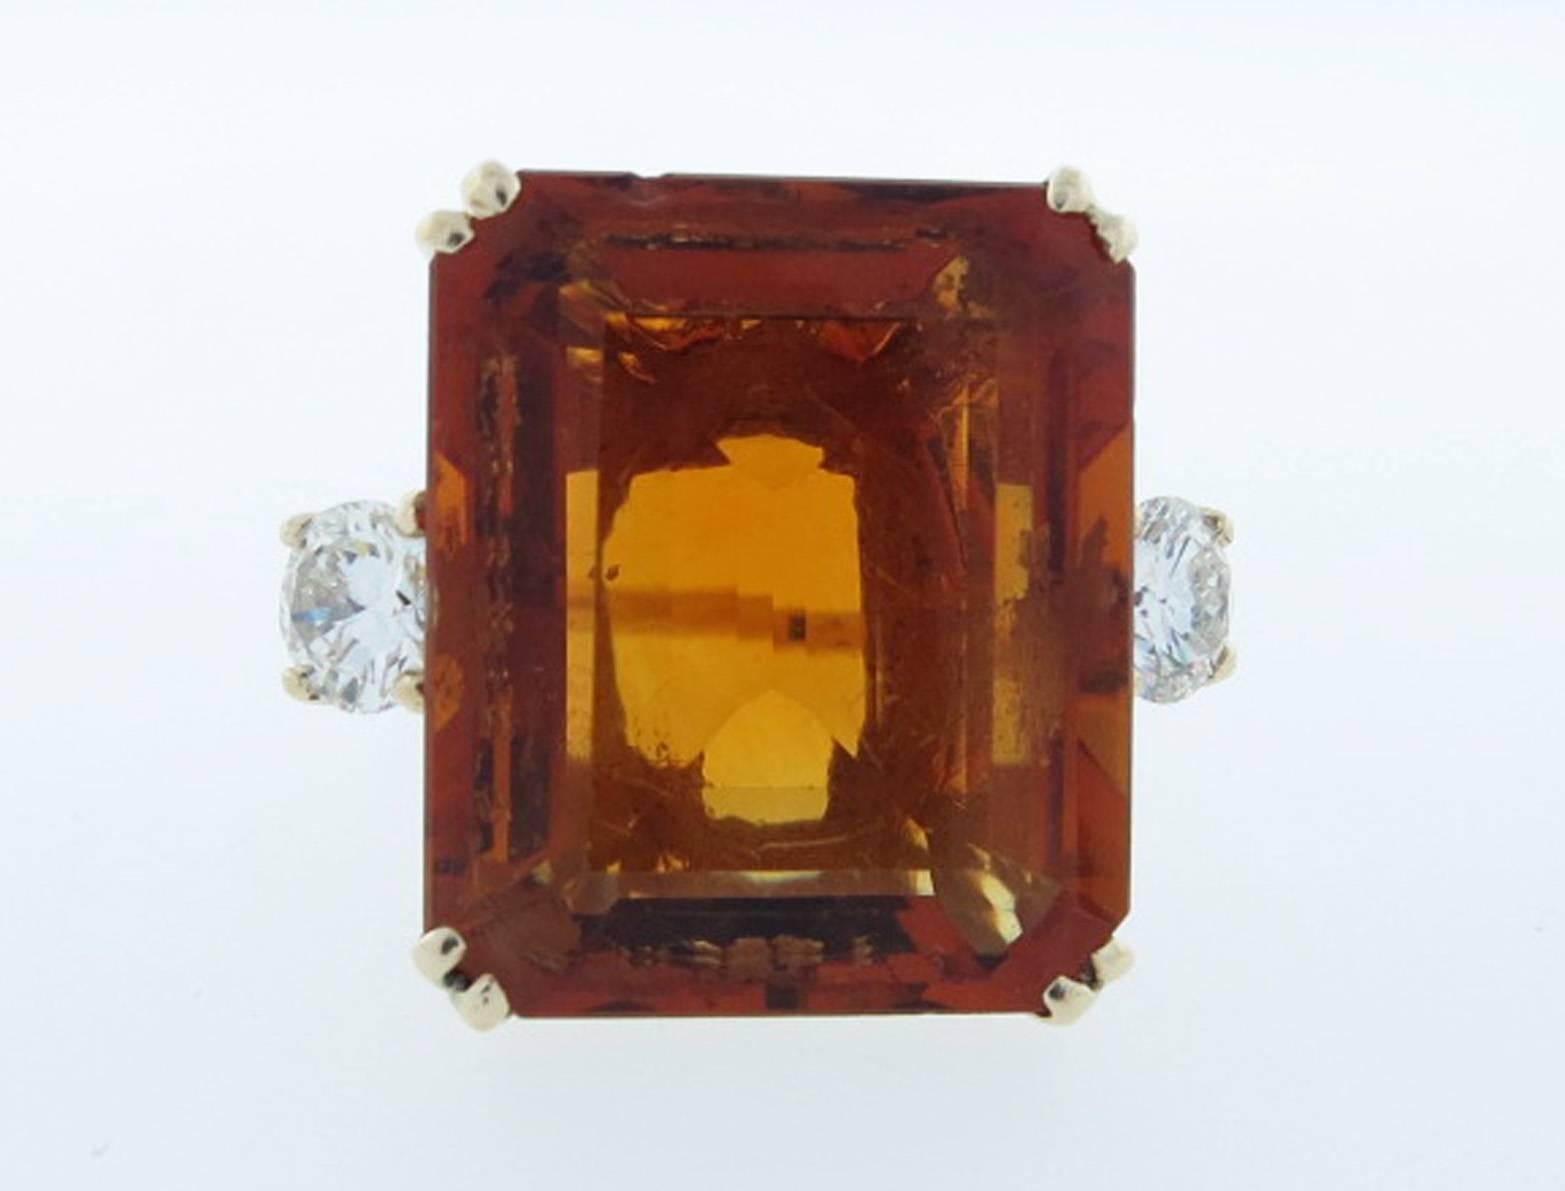 Ladies 14kt. yellow gold ring measuring approx 3/4 inches in length. The center is prong set with a rich caramel color faceted citrine measuring 17.1 x 14.6 x 7.3 mm. weighing approx 11. cts. Each side is set with a very fine diamond each weighing